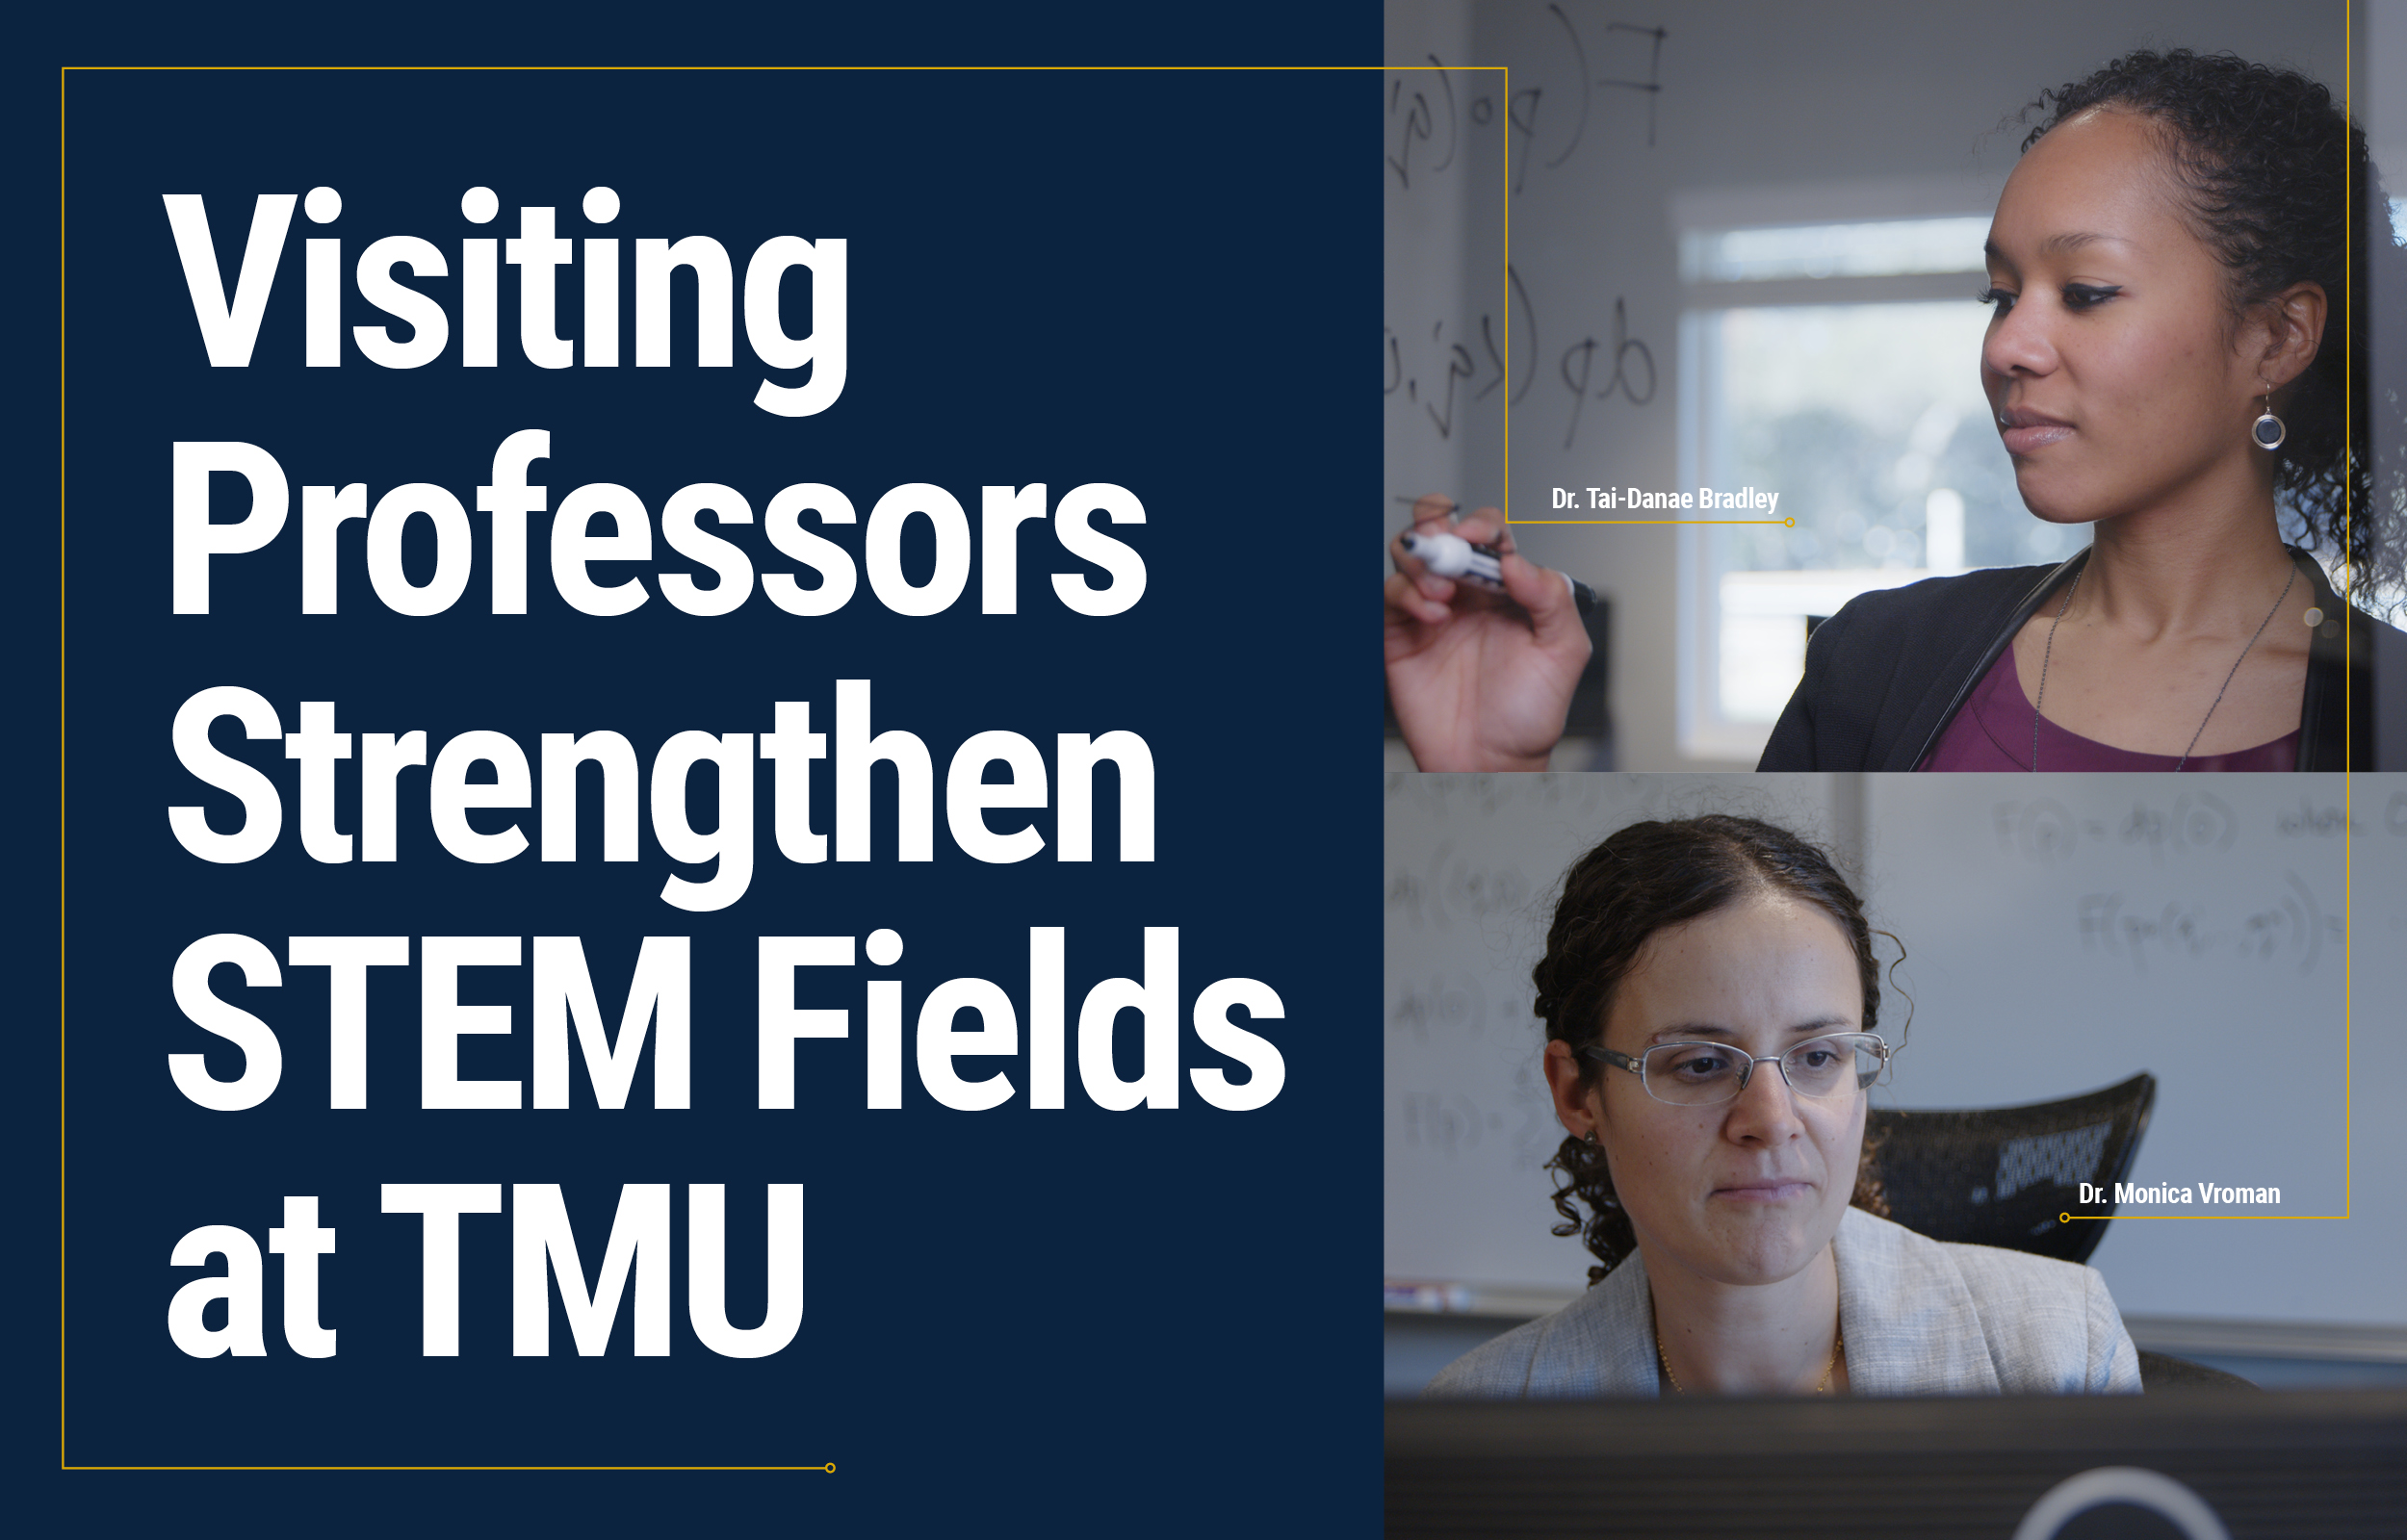 Visiting Professors Strengthen STEM Fields at TMU Featured Image